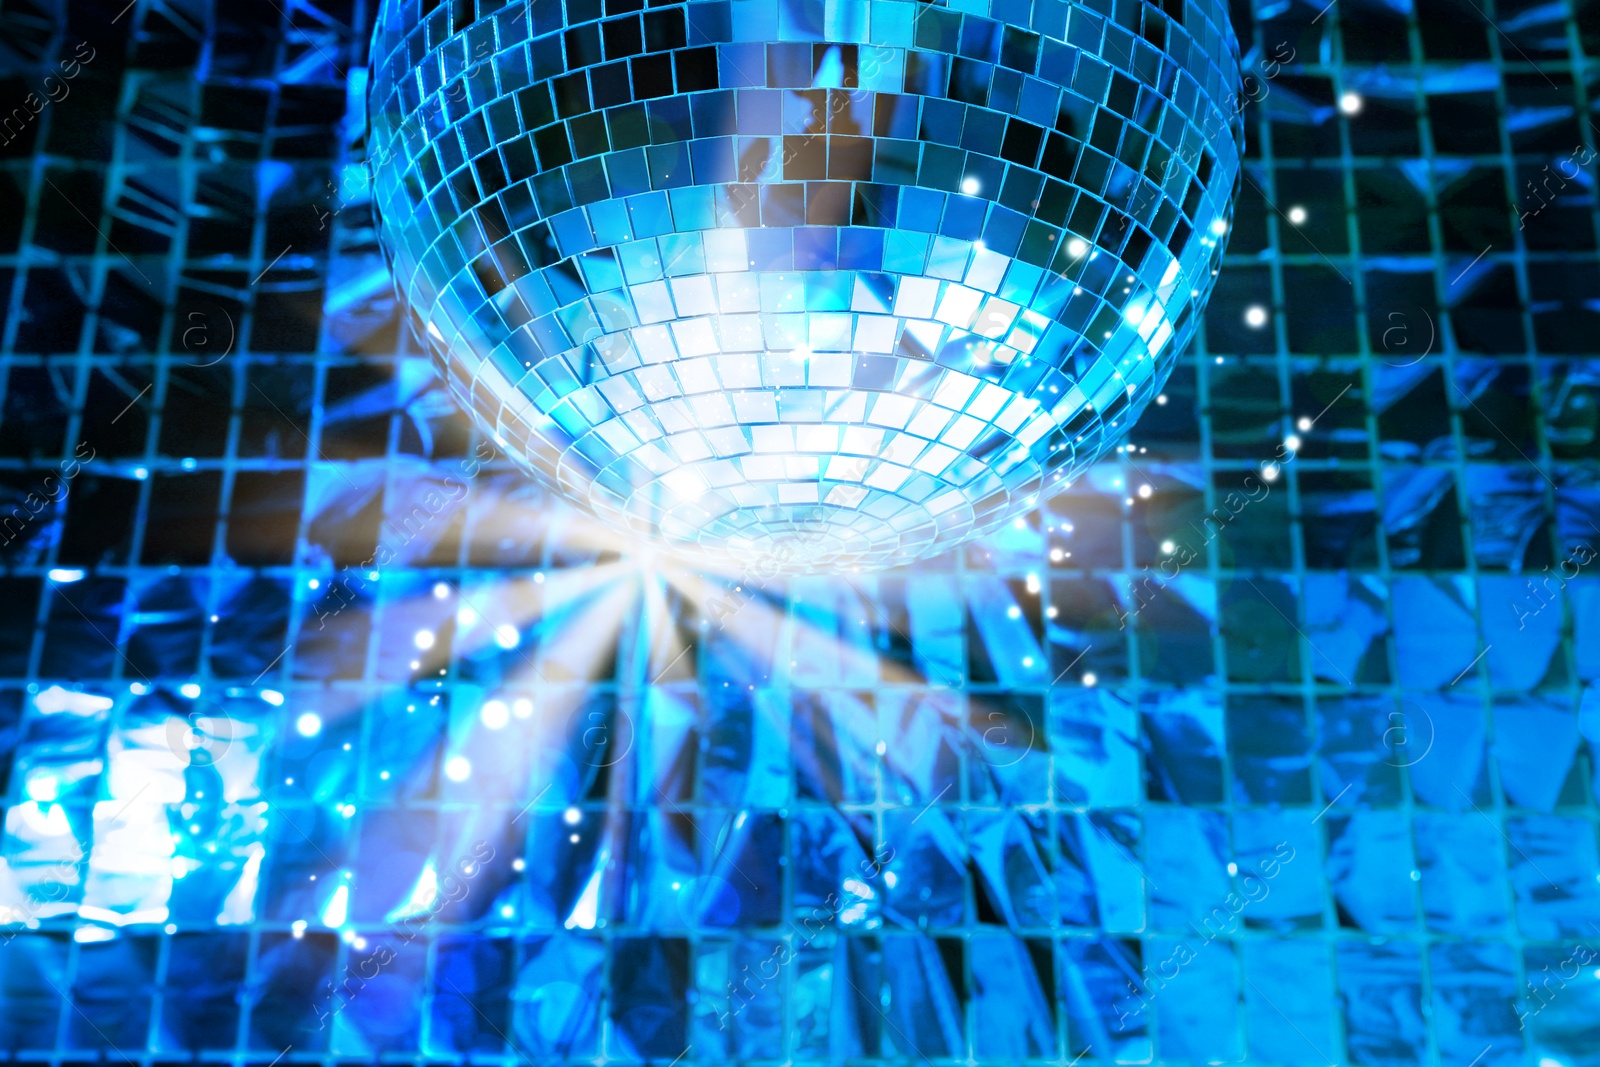 Image of Shiny disco ball against foil party curtain, low angle view. Bokeh effect